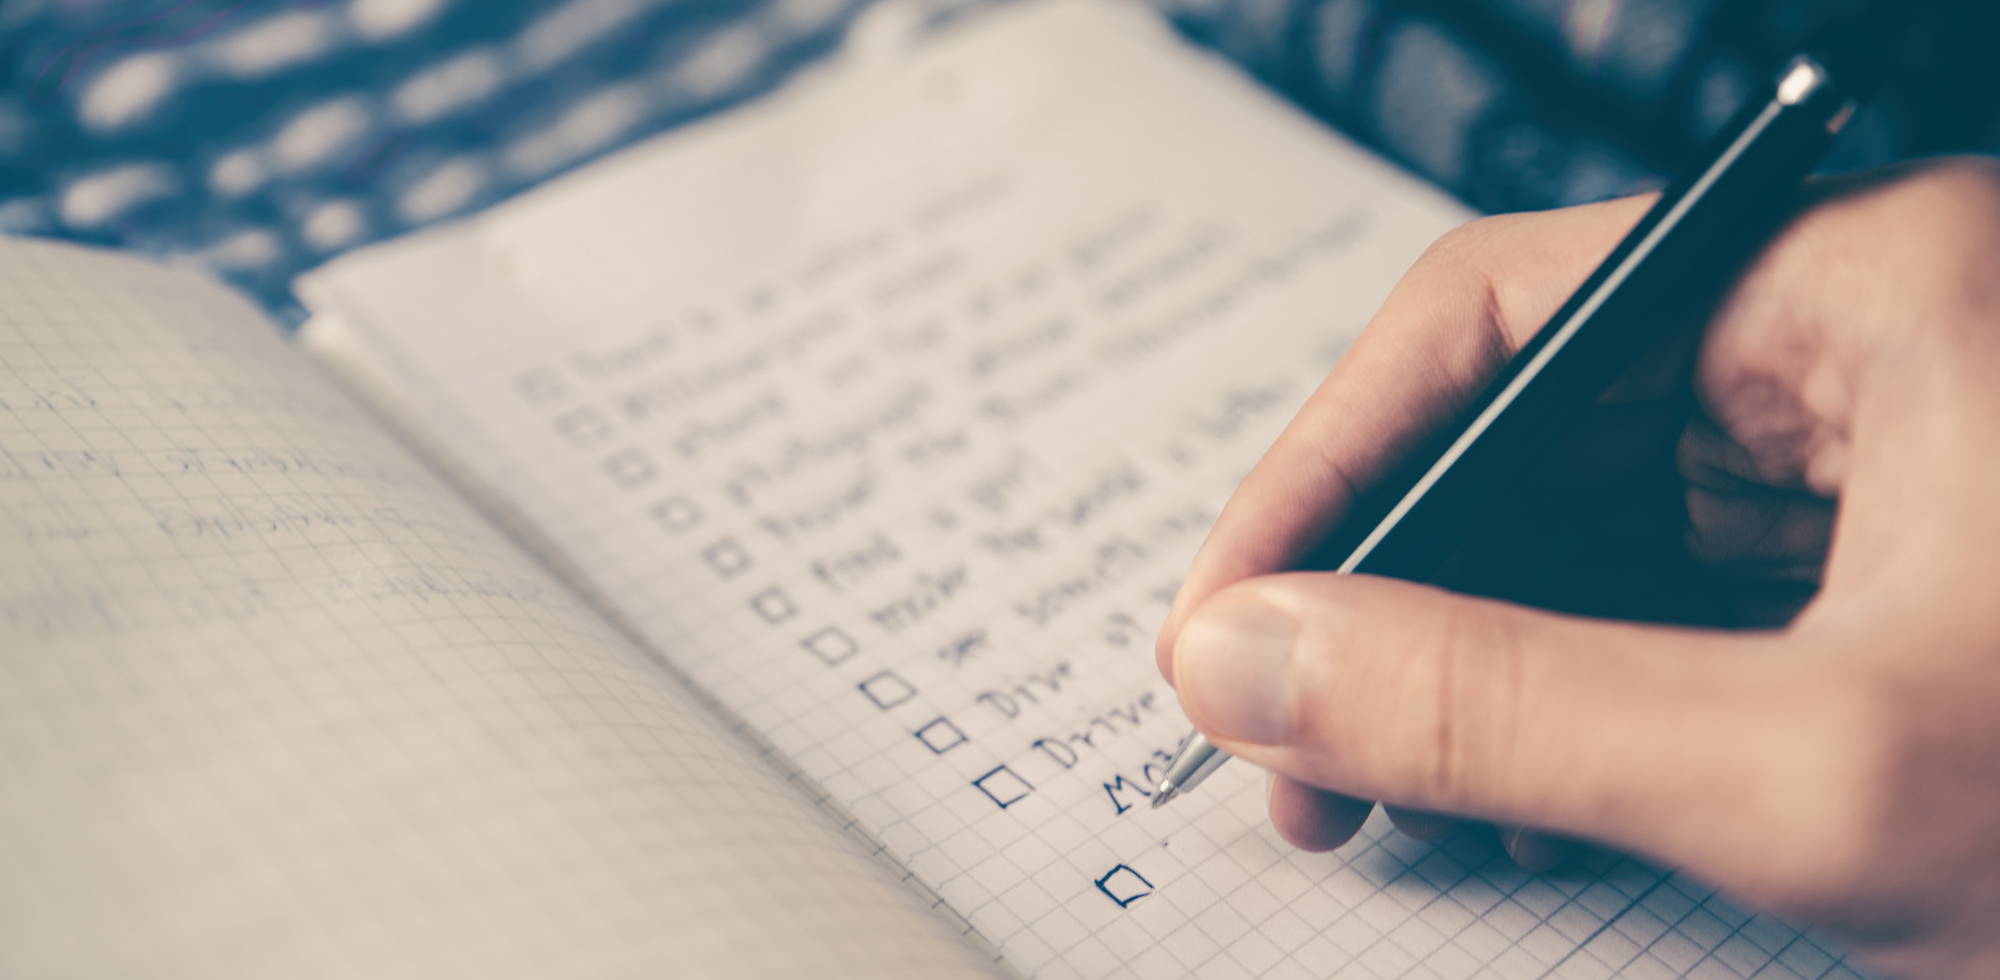 Hand Writing a Checklist Cost Of Living Crisis Mental Health